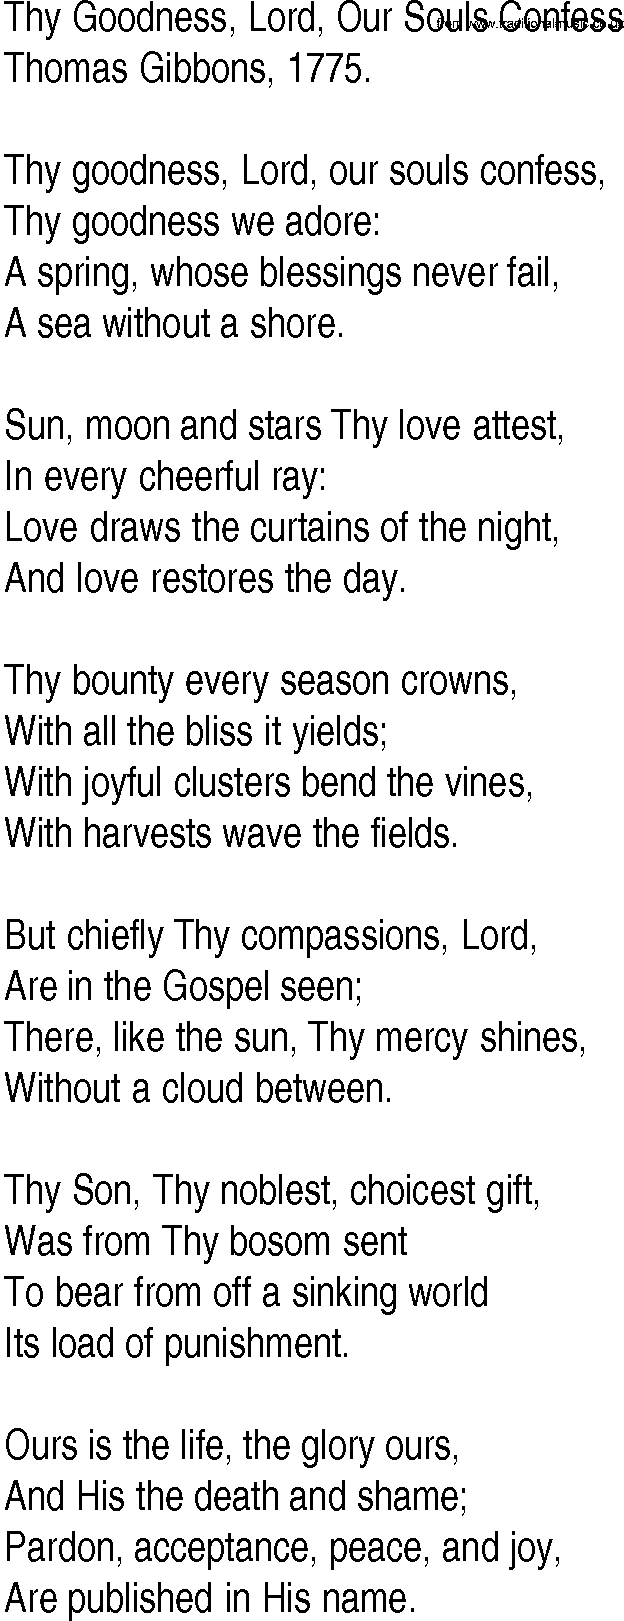 Hymn and Gospel Song: Thy Goodness, Lord, Our Souls Confess by Thomas Gibbons lyrics